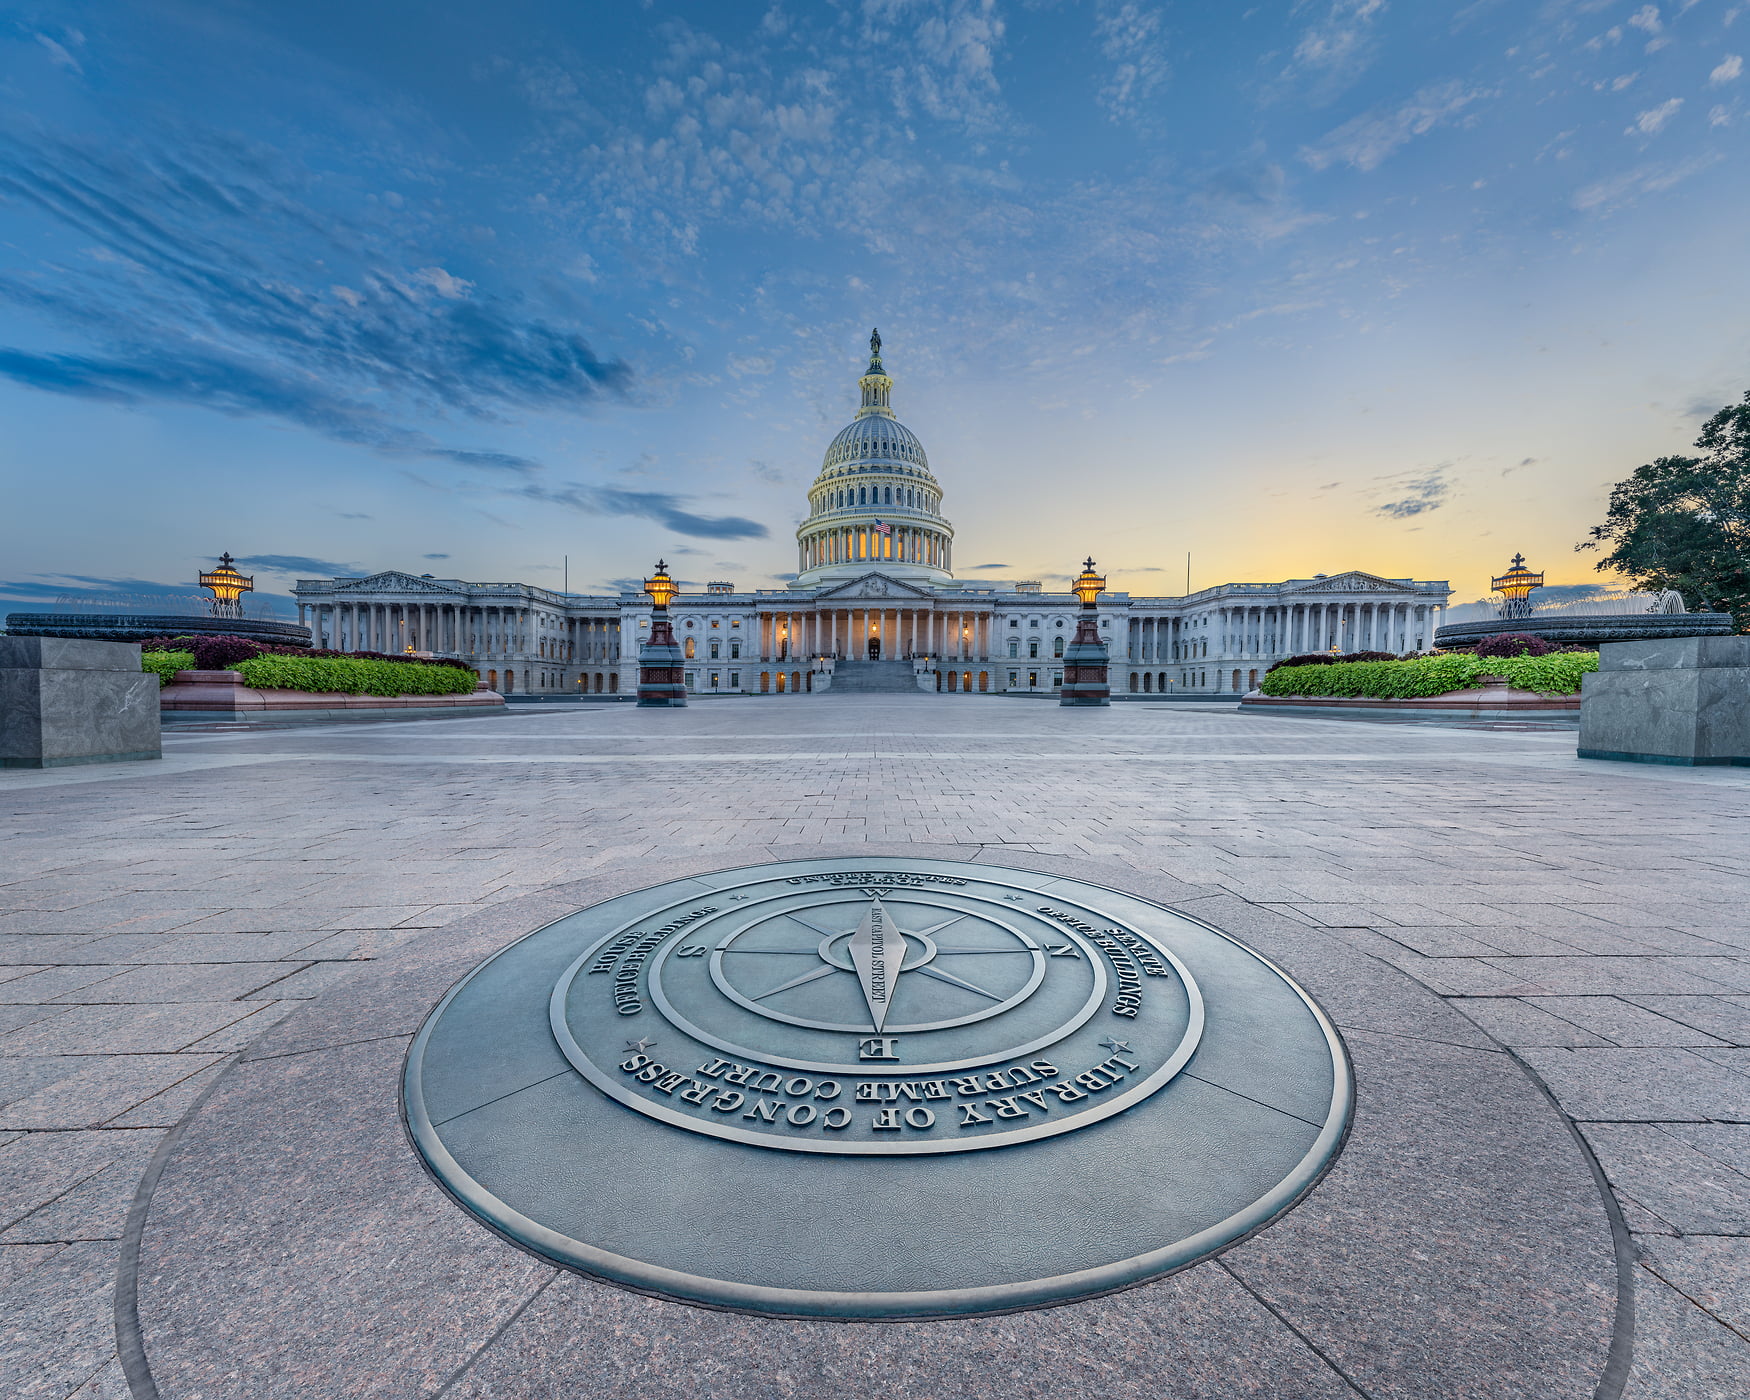 915 megapixels! A very high resolution, large-format VAST photo print of the USA Capitol Building and Compass; photograph created by Tim Lo Monaco at the United States Capitol in Washington, D.C., USA.